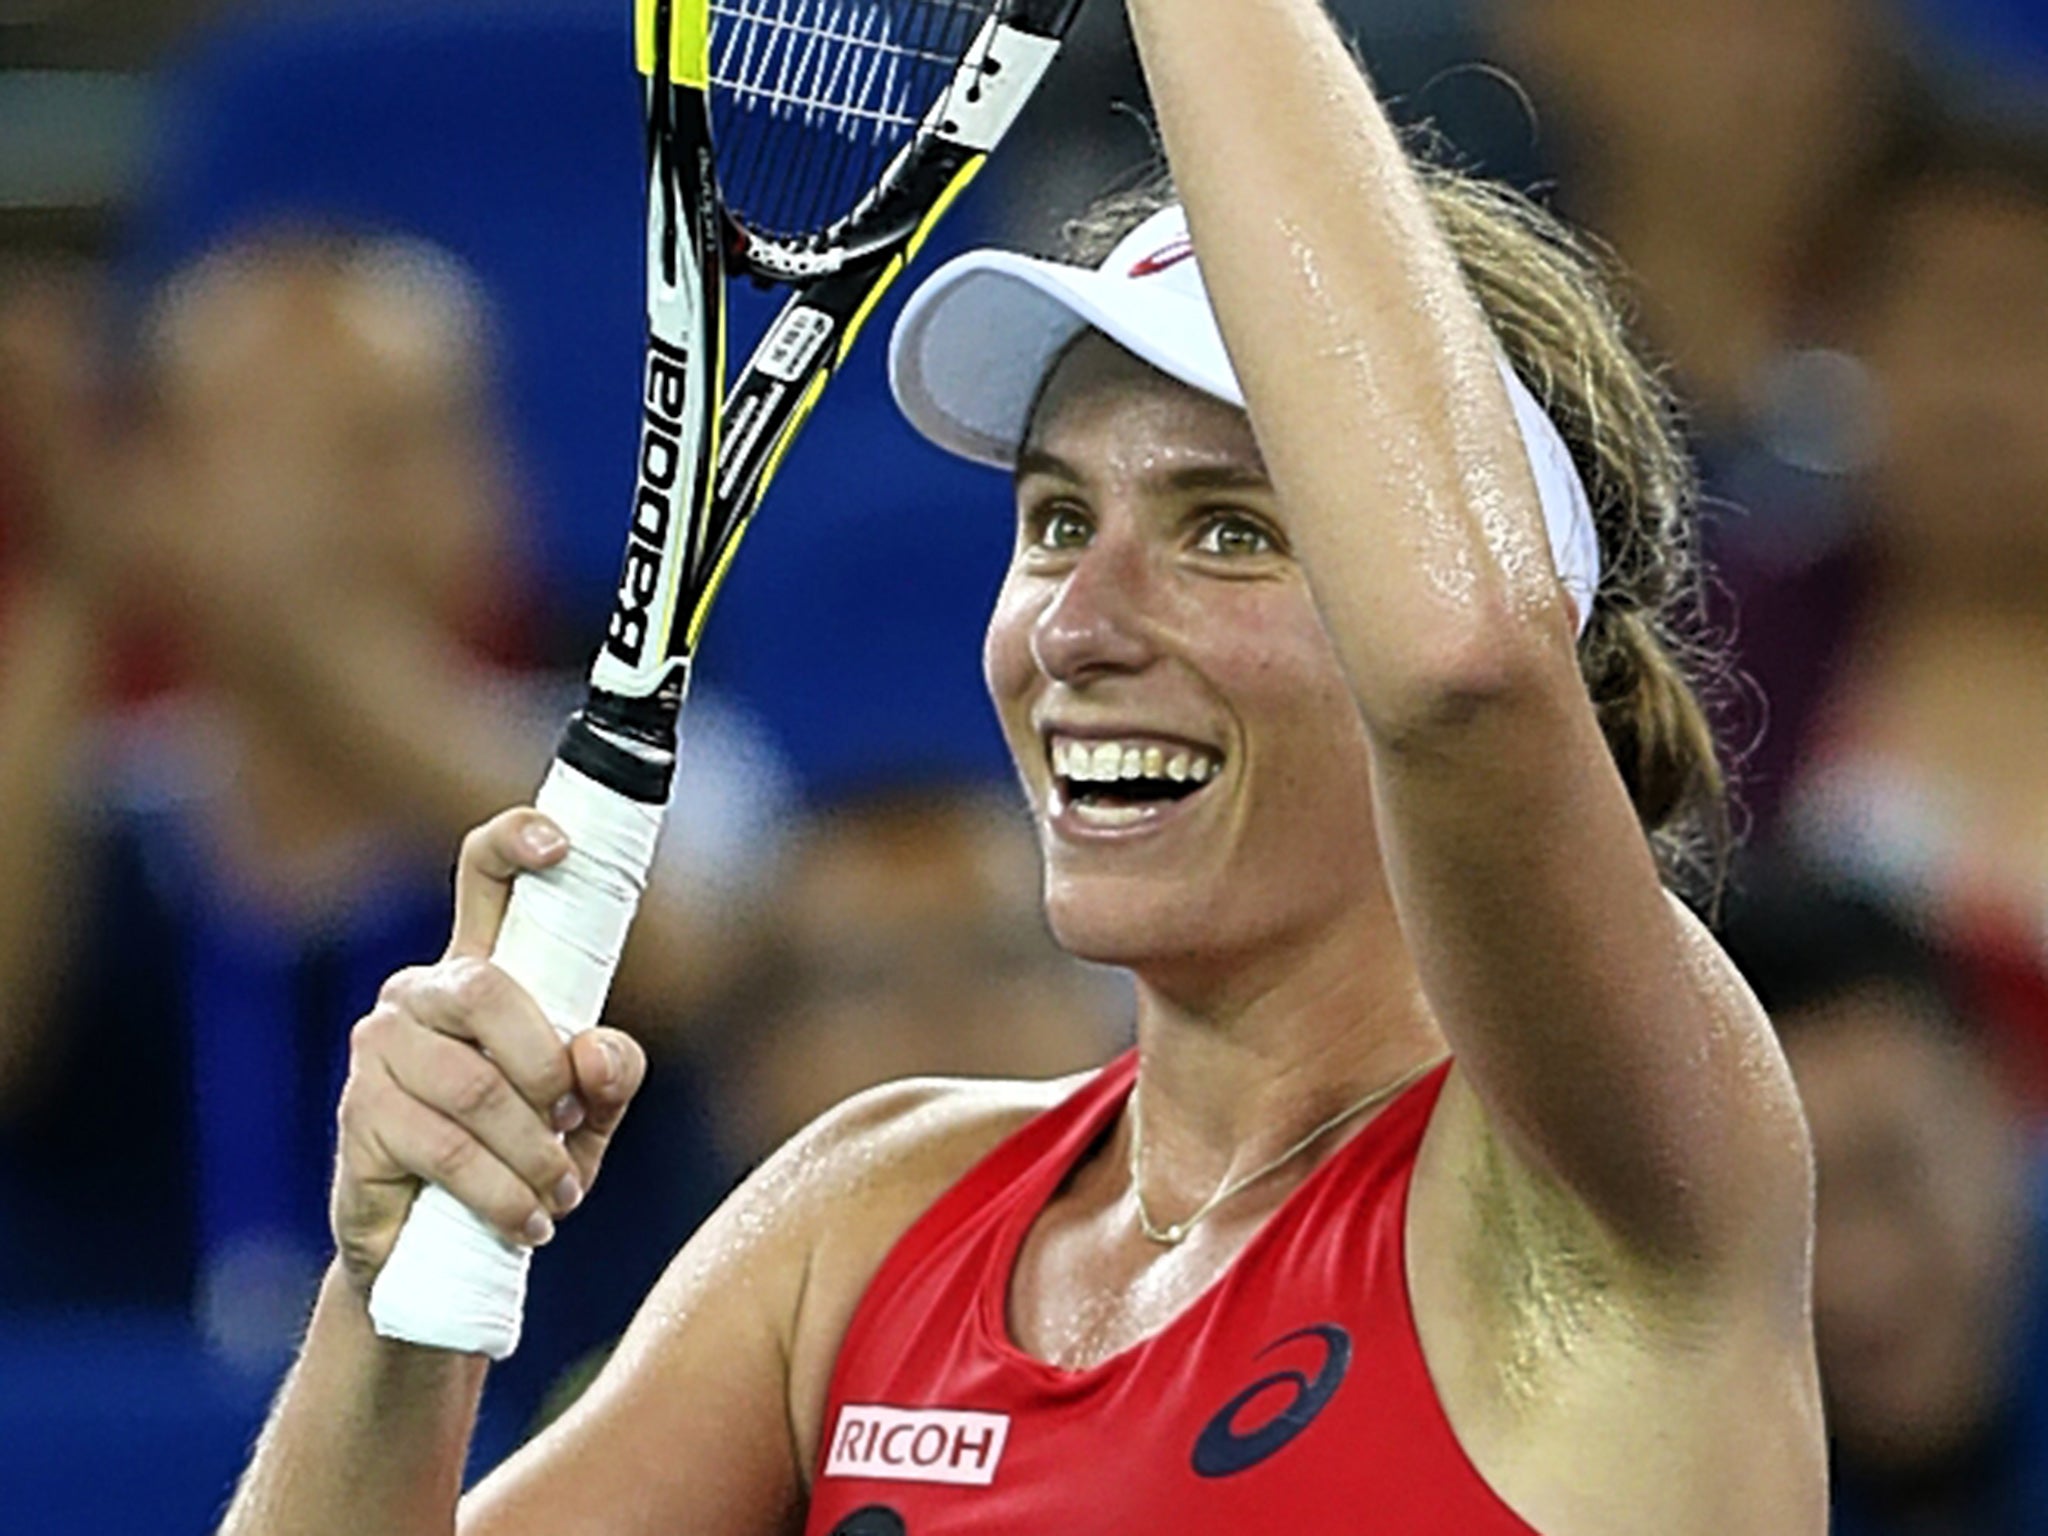 &#13;
Johanna Konta will face Venus Williams in the first round&#13;